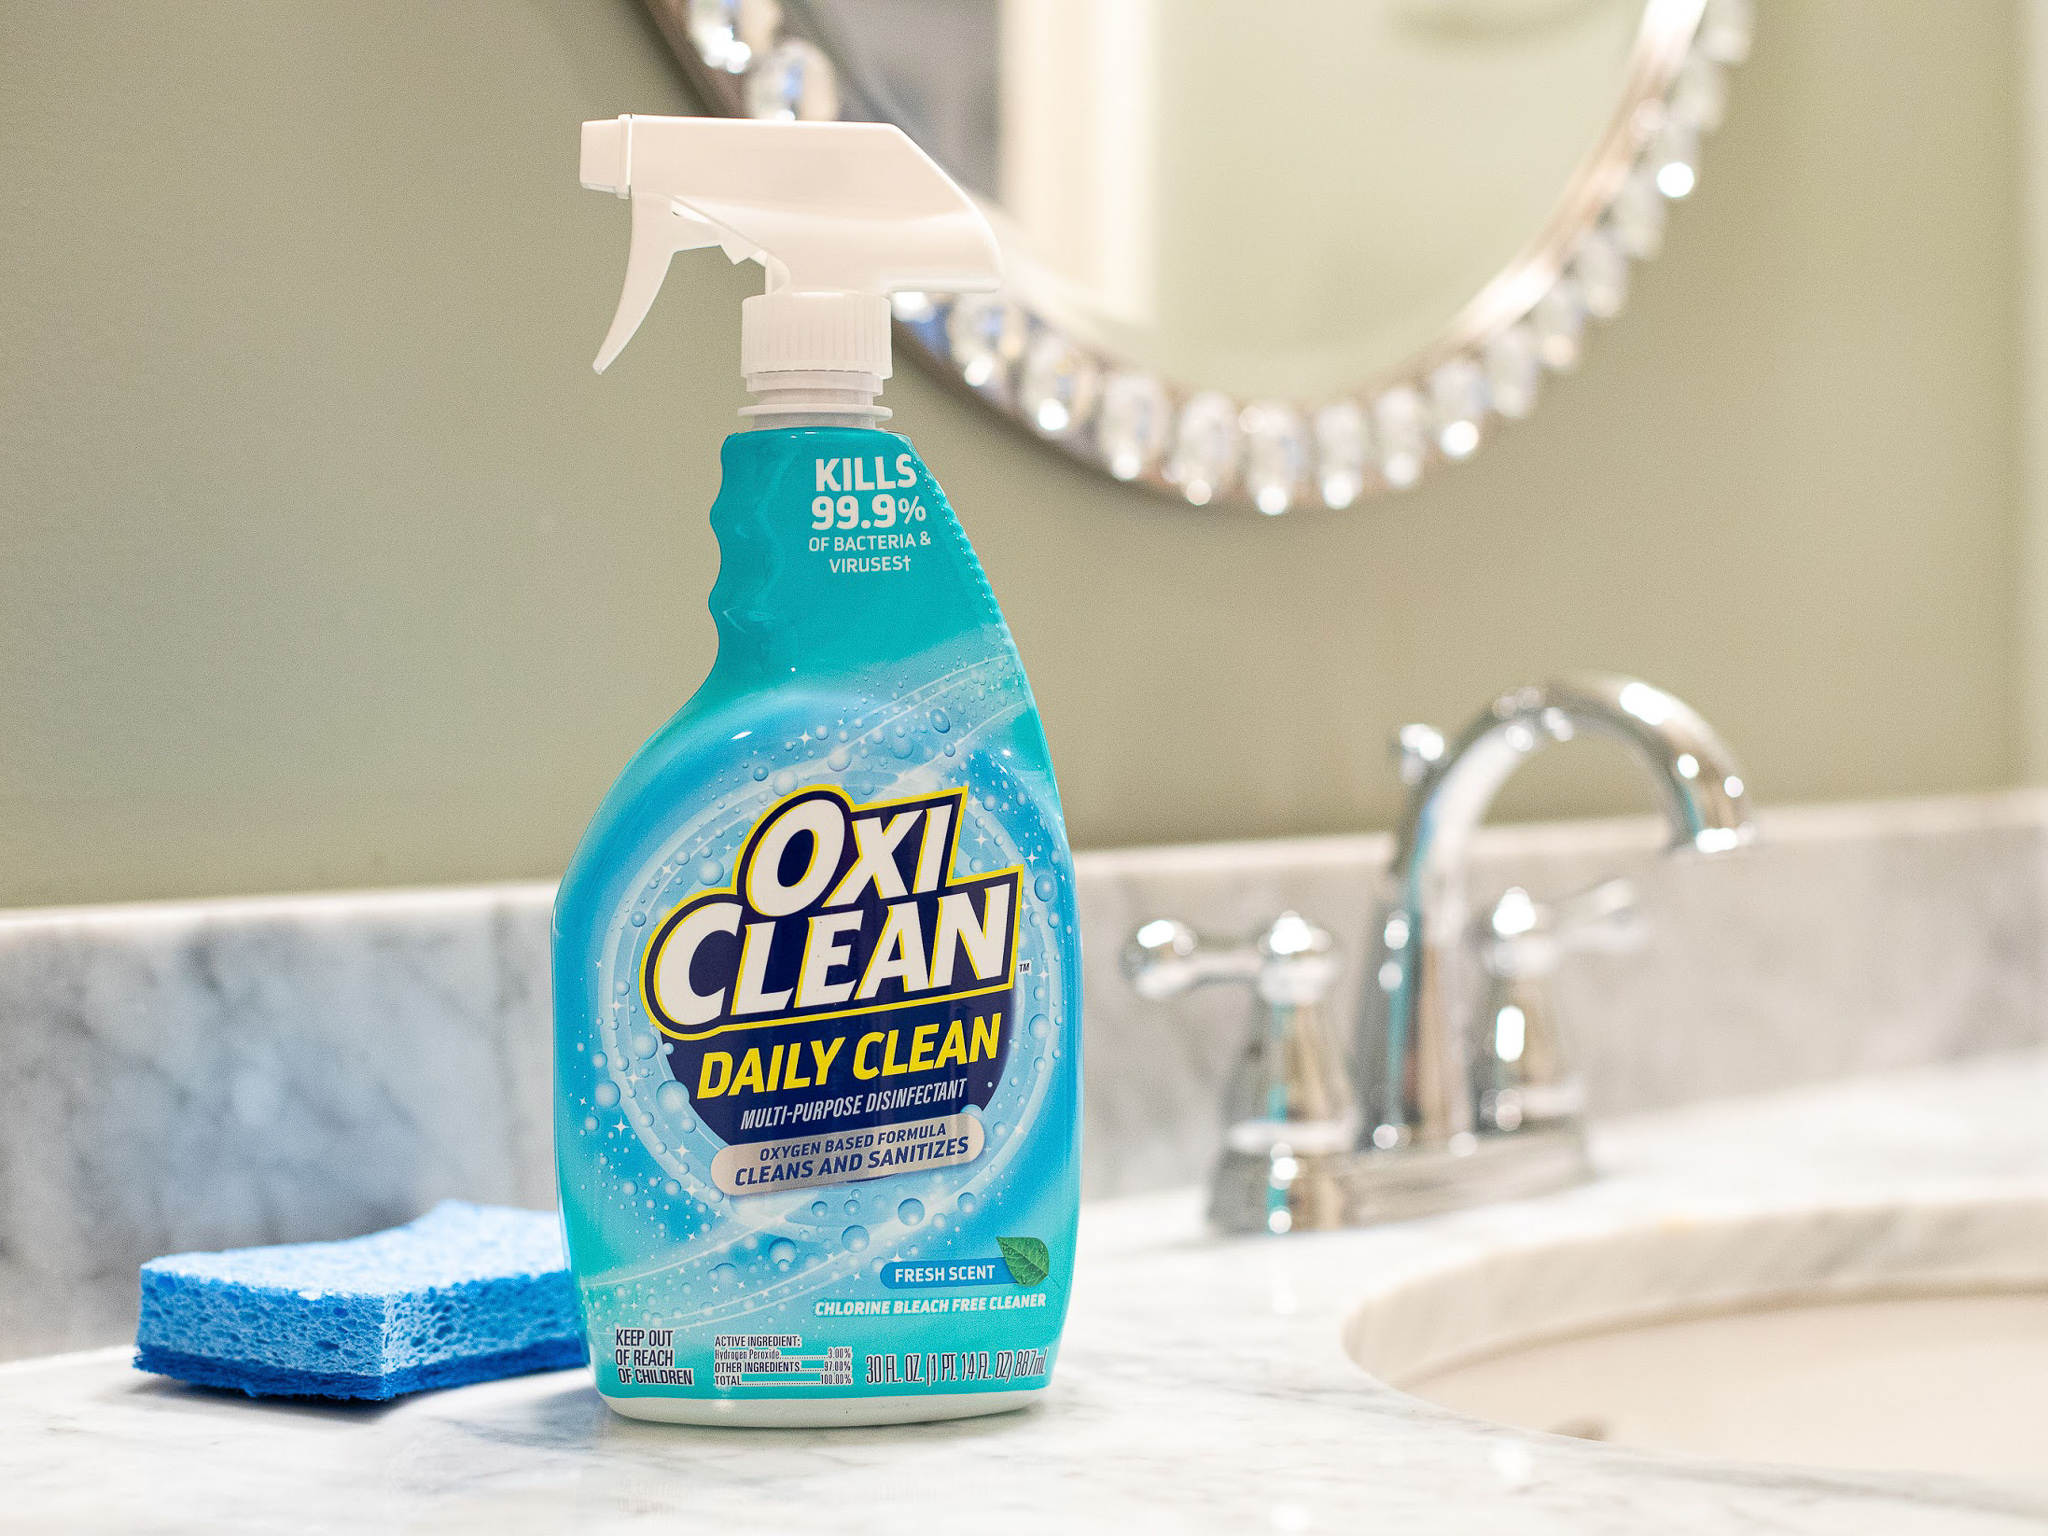 New OxiClean™ Multi-Purpose Disinfectant Cleaners Are Now Available At Publix - Clean & Disinfect Household Surfaces With The Power Of OxiClean™ on I Heart Publix